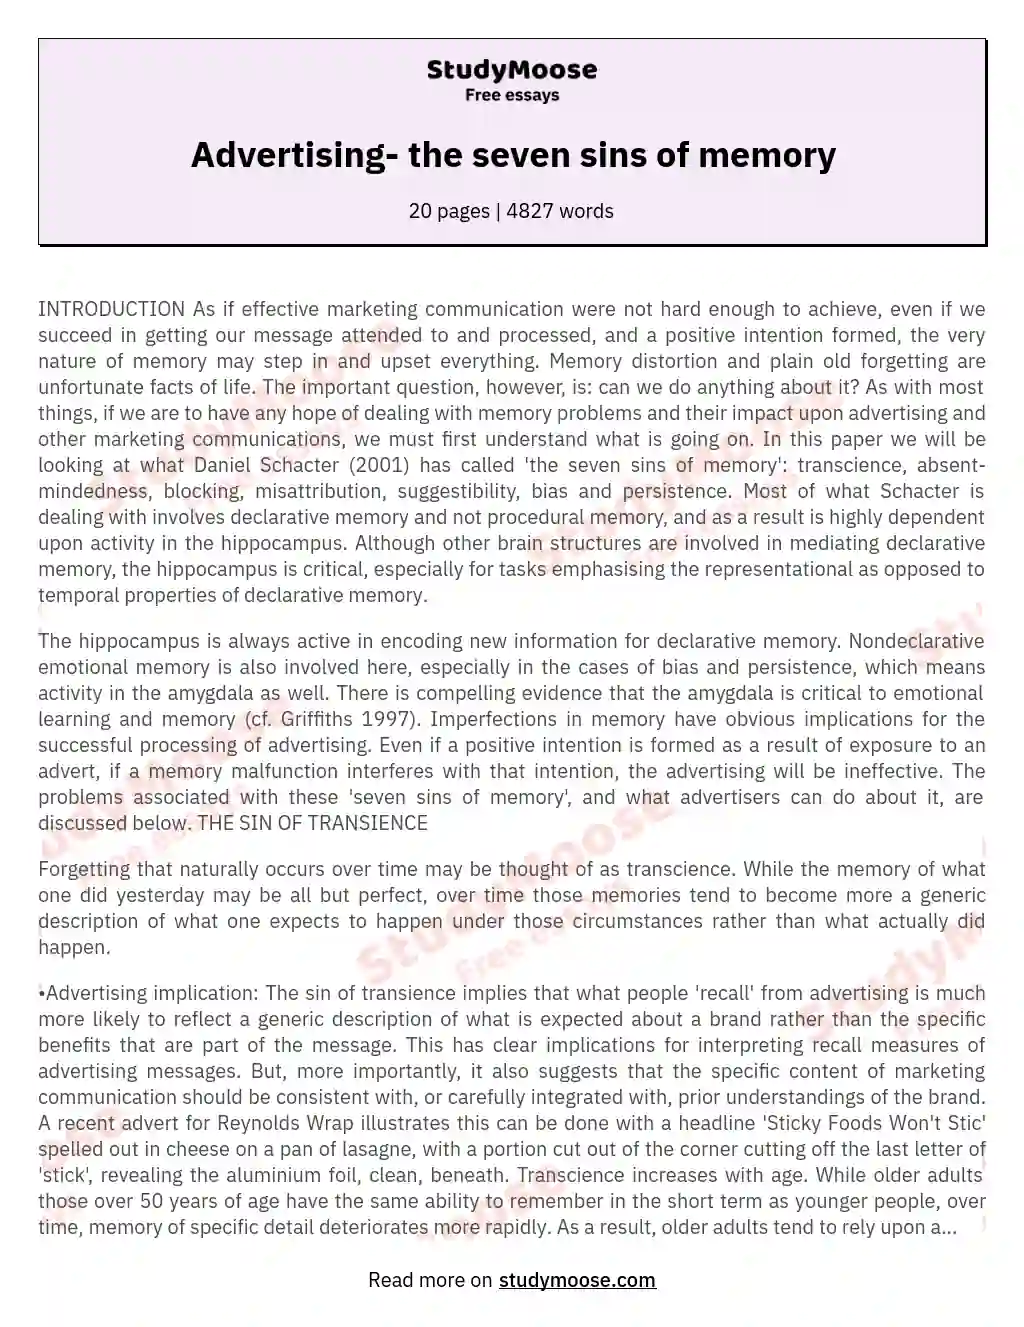 Advertising- the seven sins of memory essay